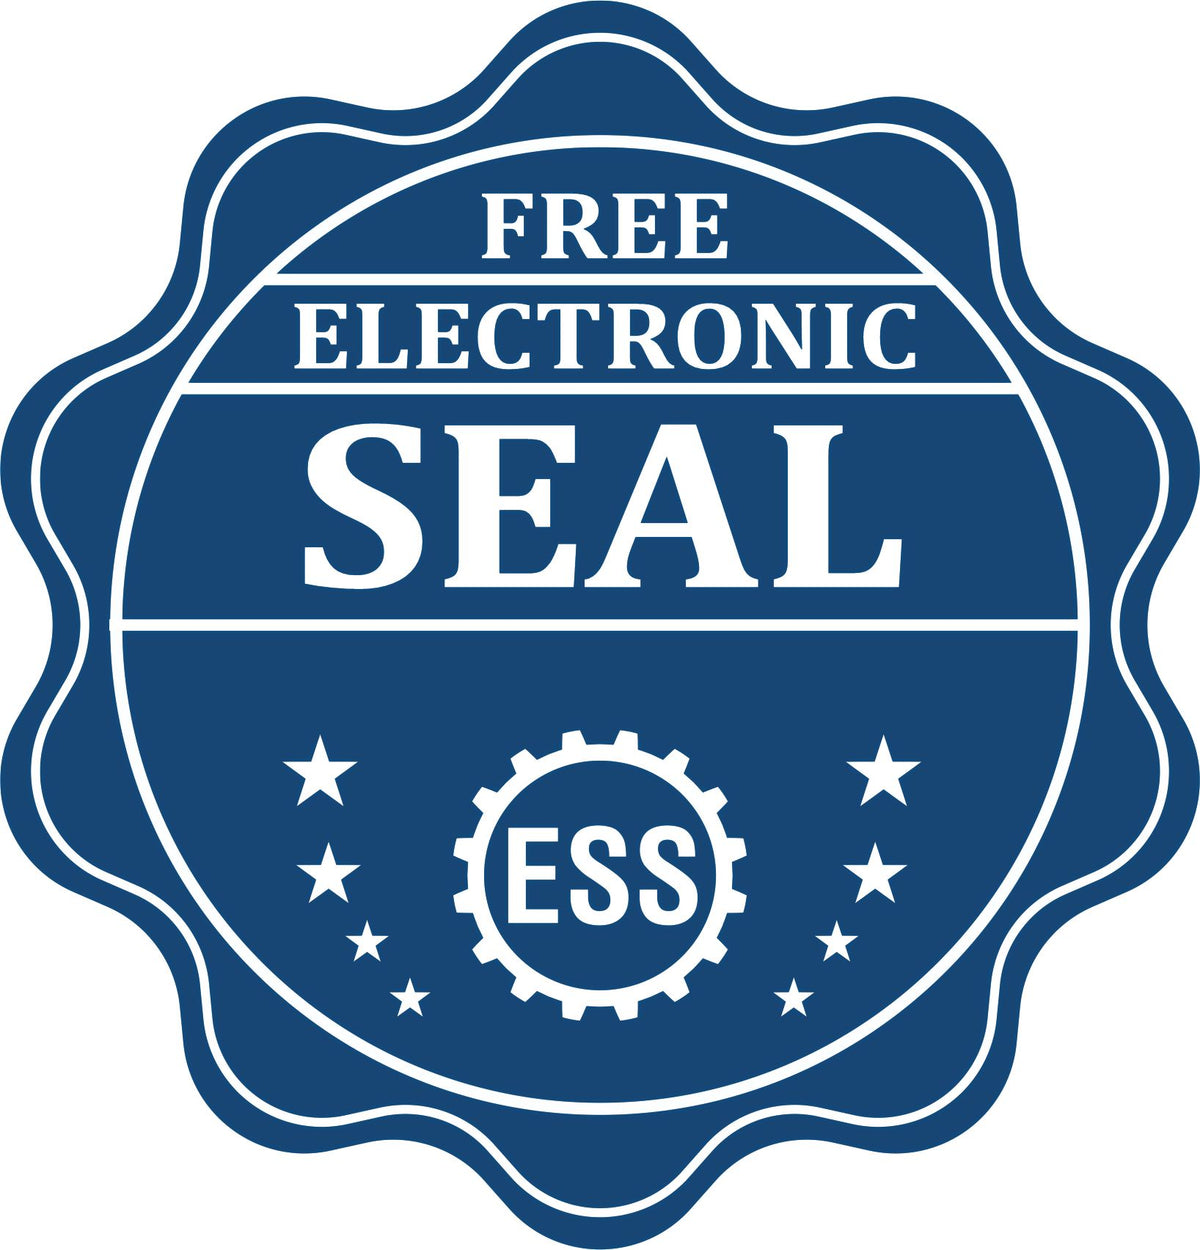 A badge showing a free electronic seal for the Slim Pre-Inked Virginia Landscape Architect Seal Stamp with stars and the ESS gear on the emblem.